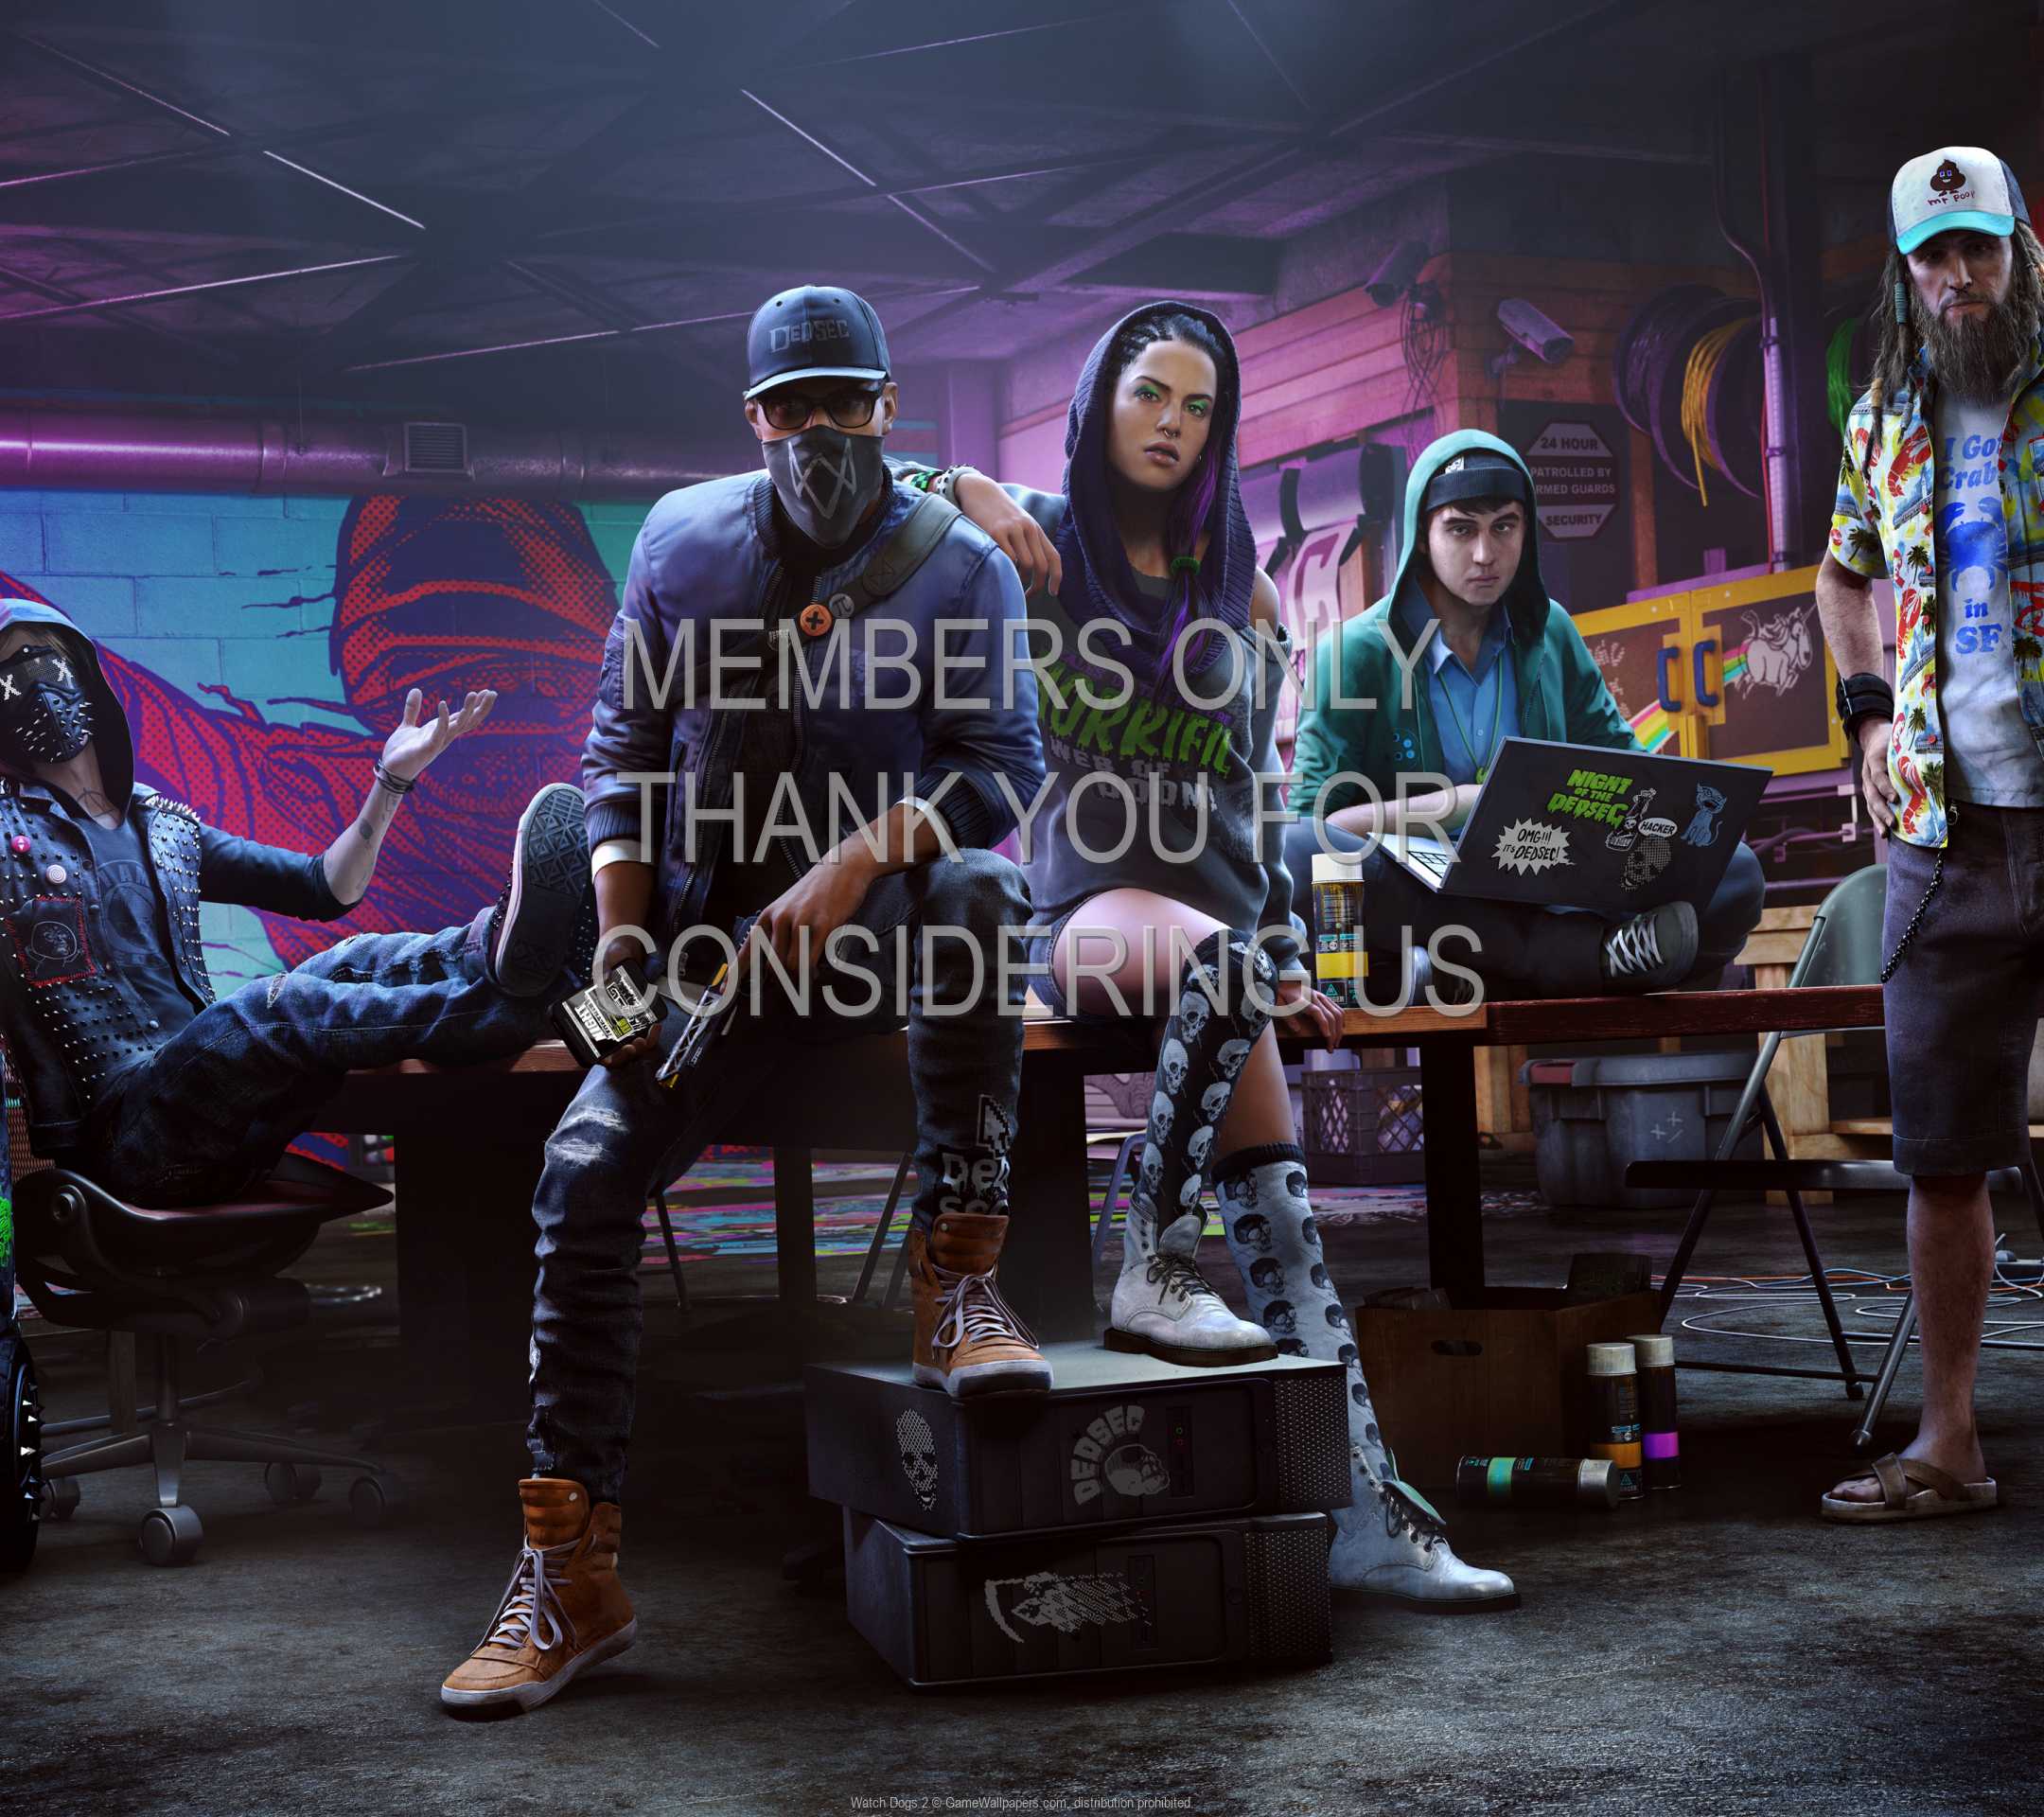 Watch Dogs 2 1080p Horizontal Mobiele achtergrond 03